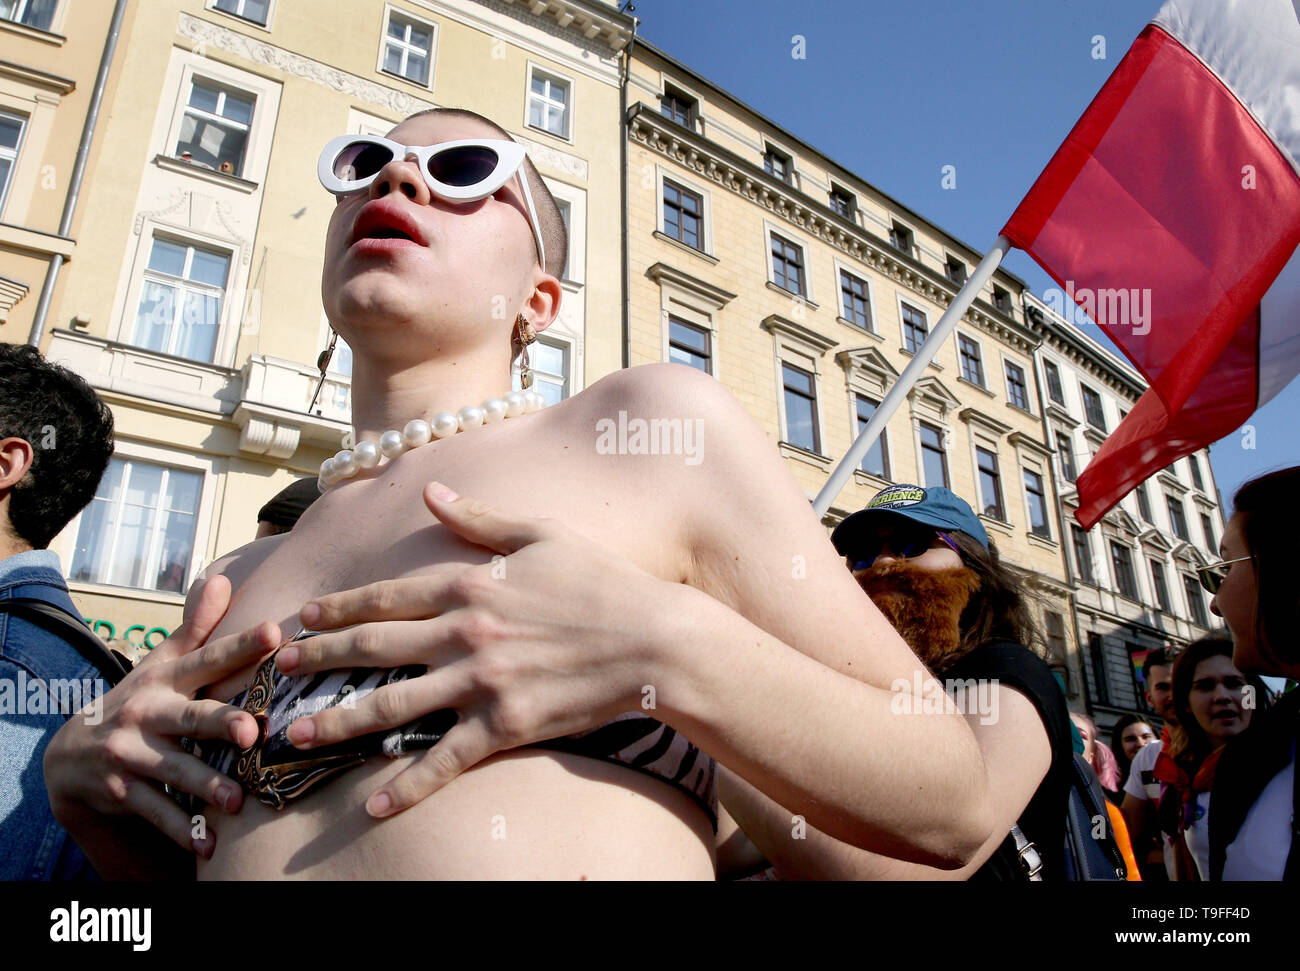 Krakow, Poland. 18th May, 2019. Man during the Equality March in Krakow. LGBT people and their supporters walk through the streets of Krakow to celebrate diversity and tolerance and express their opposition to discrimination and exclusion. The march was met in the city center by anti LGBT protesters from the far right organizations. Credit: Damian Klamka/SOPA Images/ZUMA Wire/Alamy Live News Stock Photo